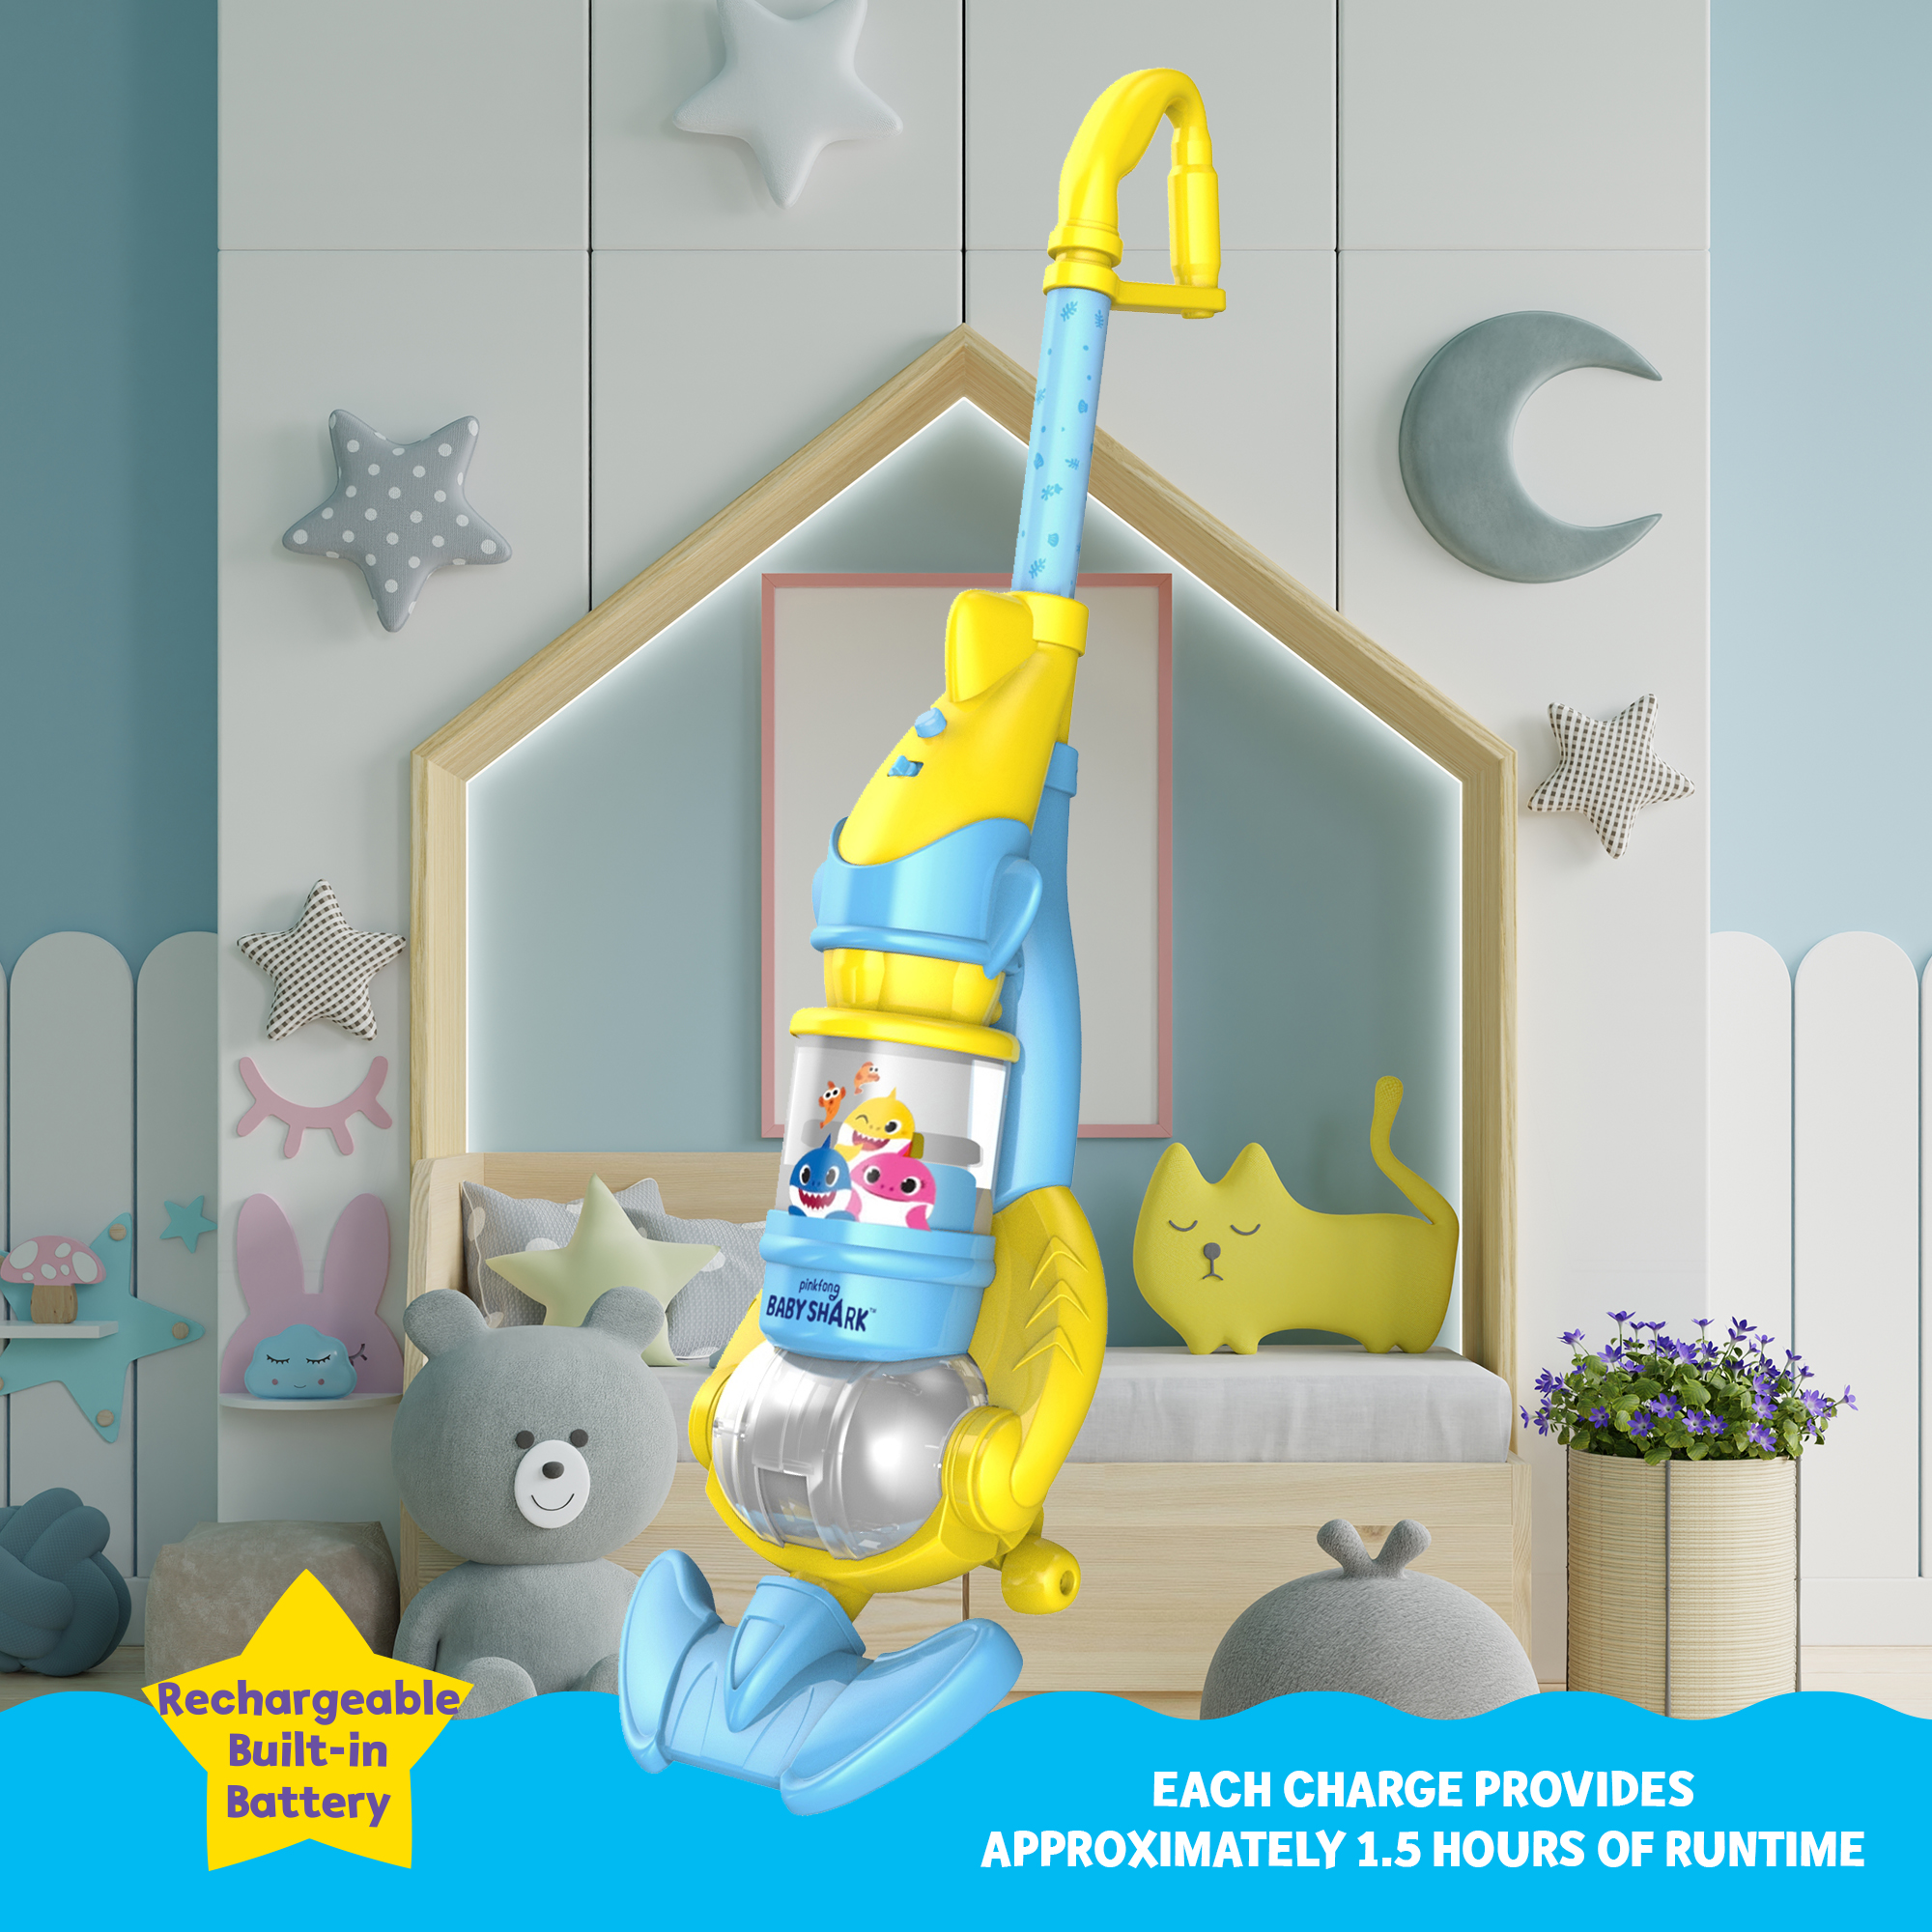 Pinkfong Baby Shark Children's Cordless Vacuum with Real Suction Powe for Hard Floor and Carpet - image 4 of 10